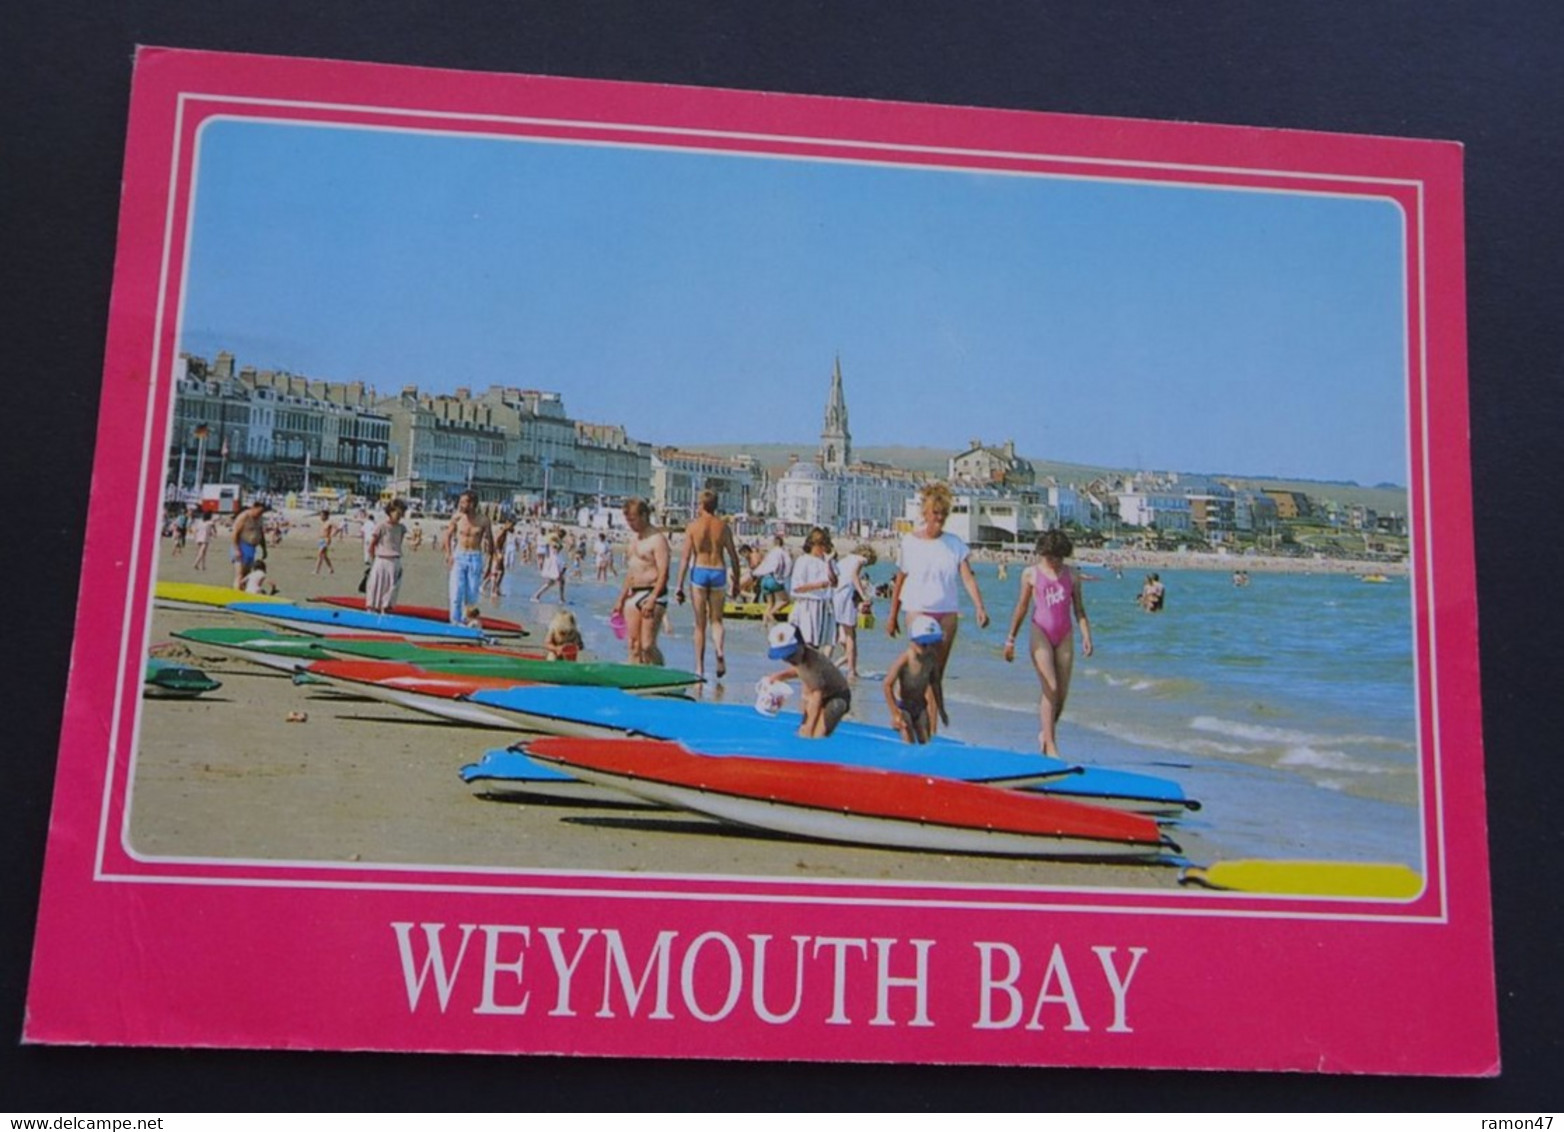 Weymouth Bay - The Don Carr Collection - Weymouth